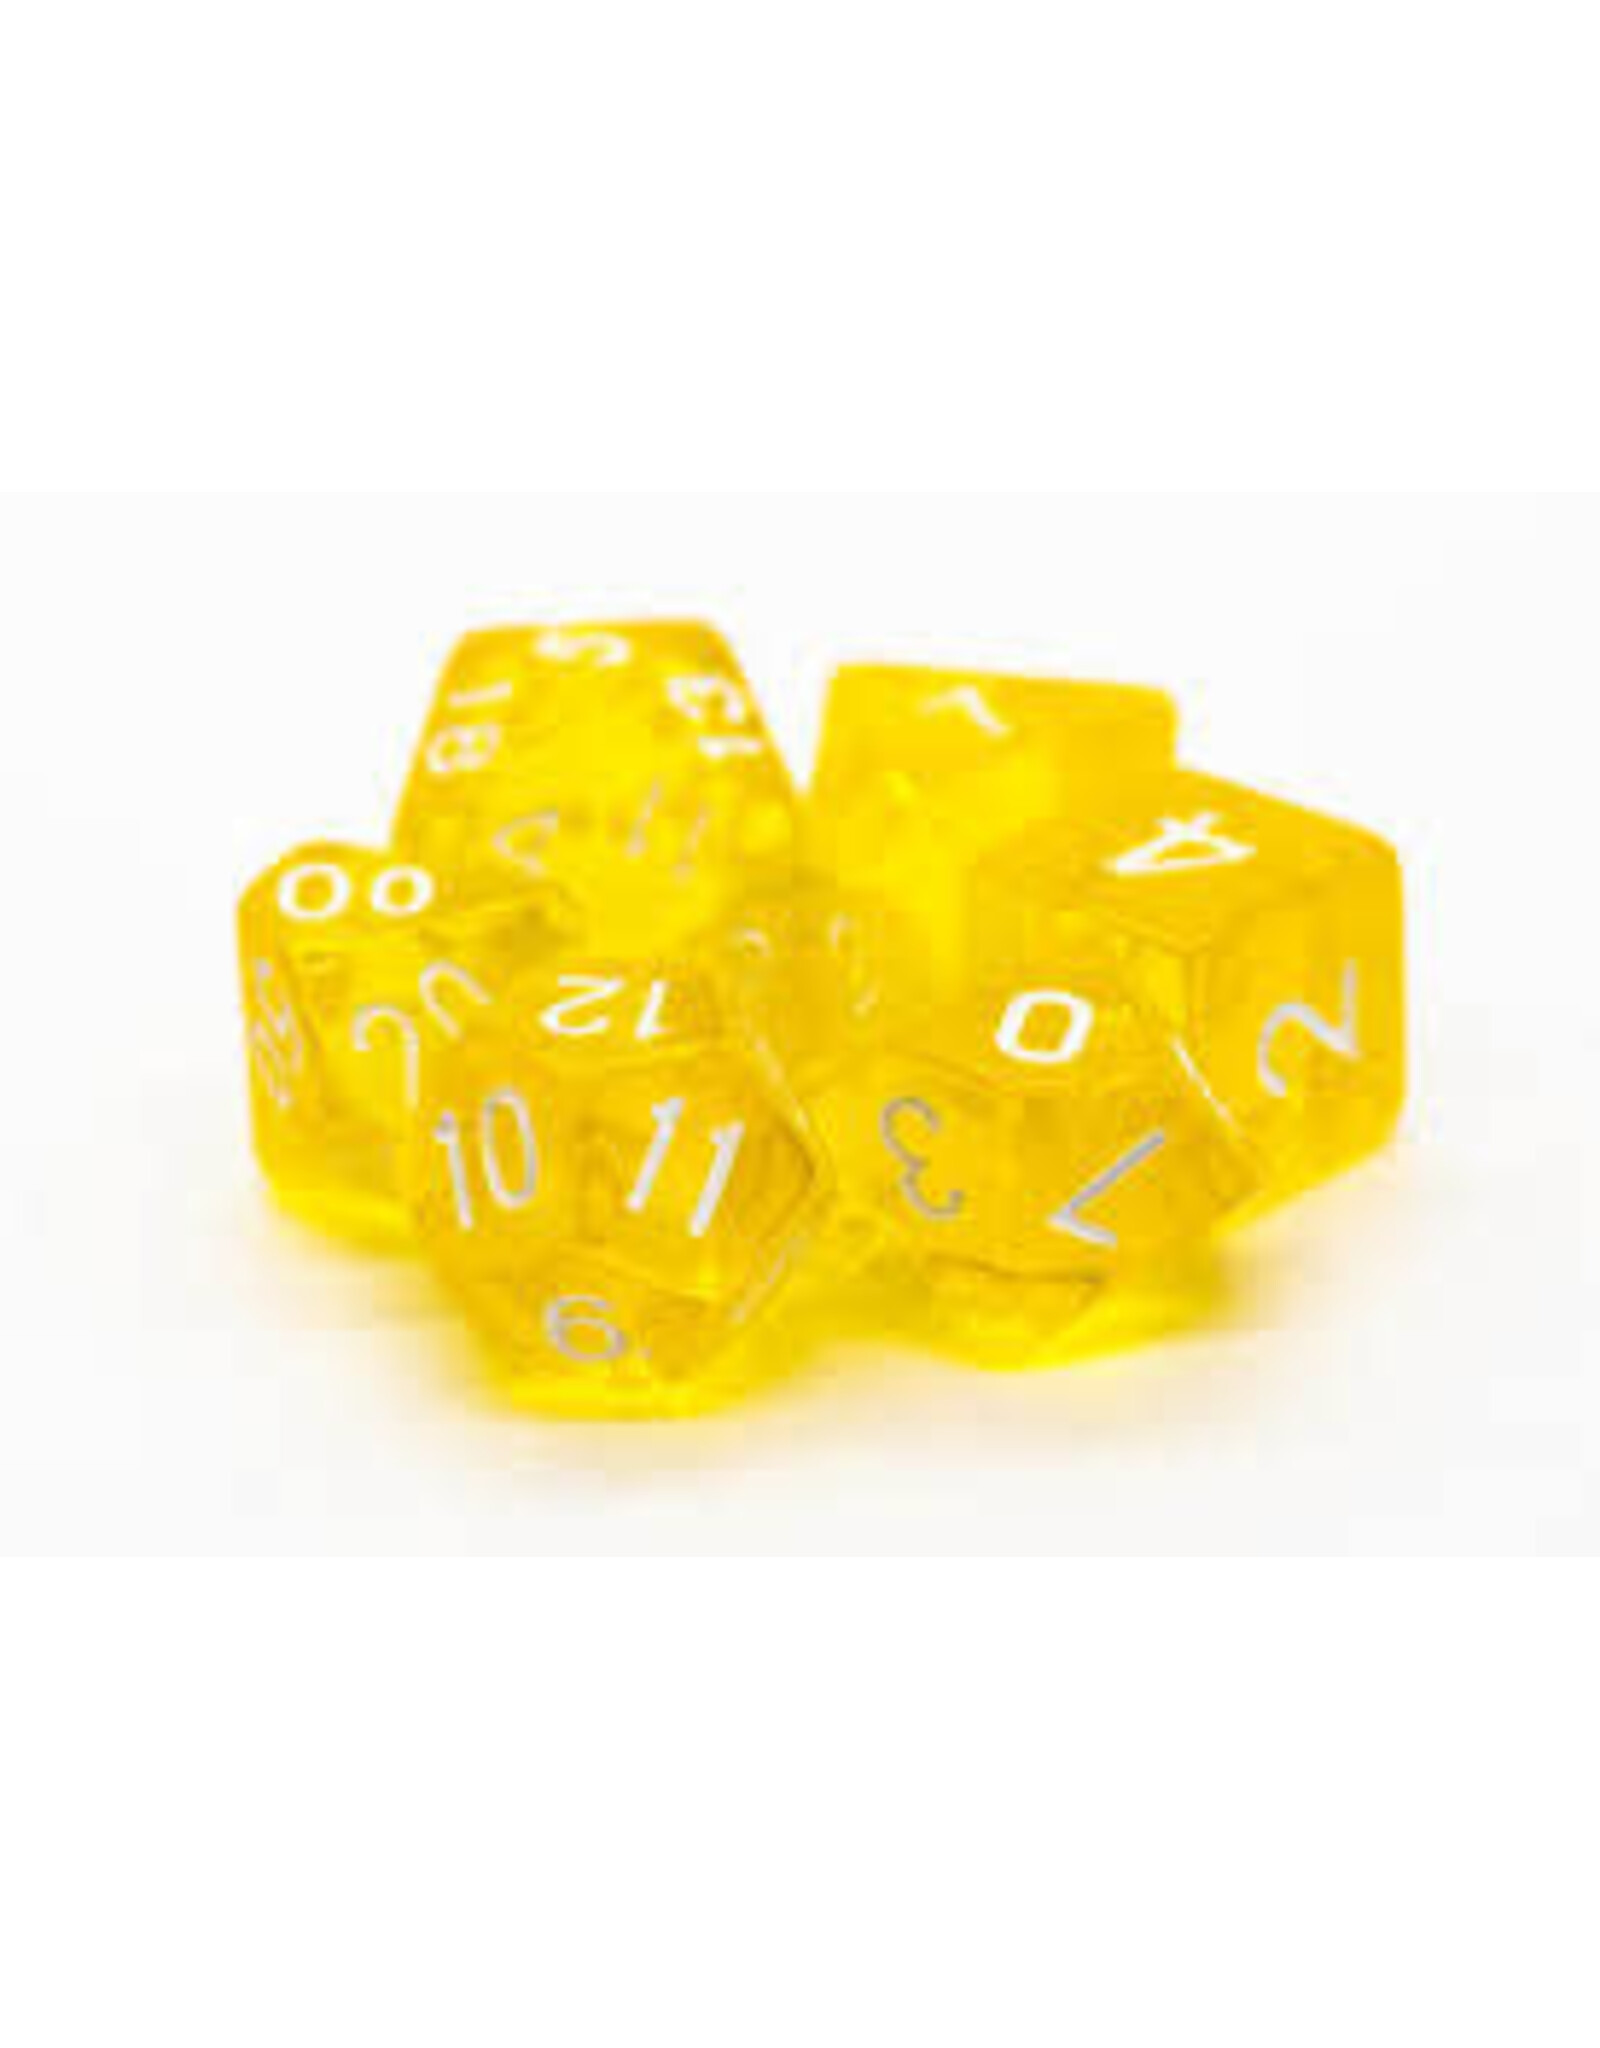 Old School Dice & Accesories Translucent Yellow